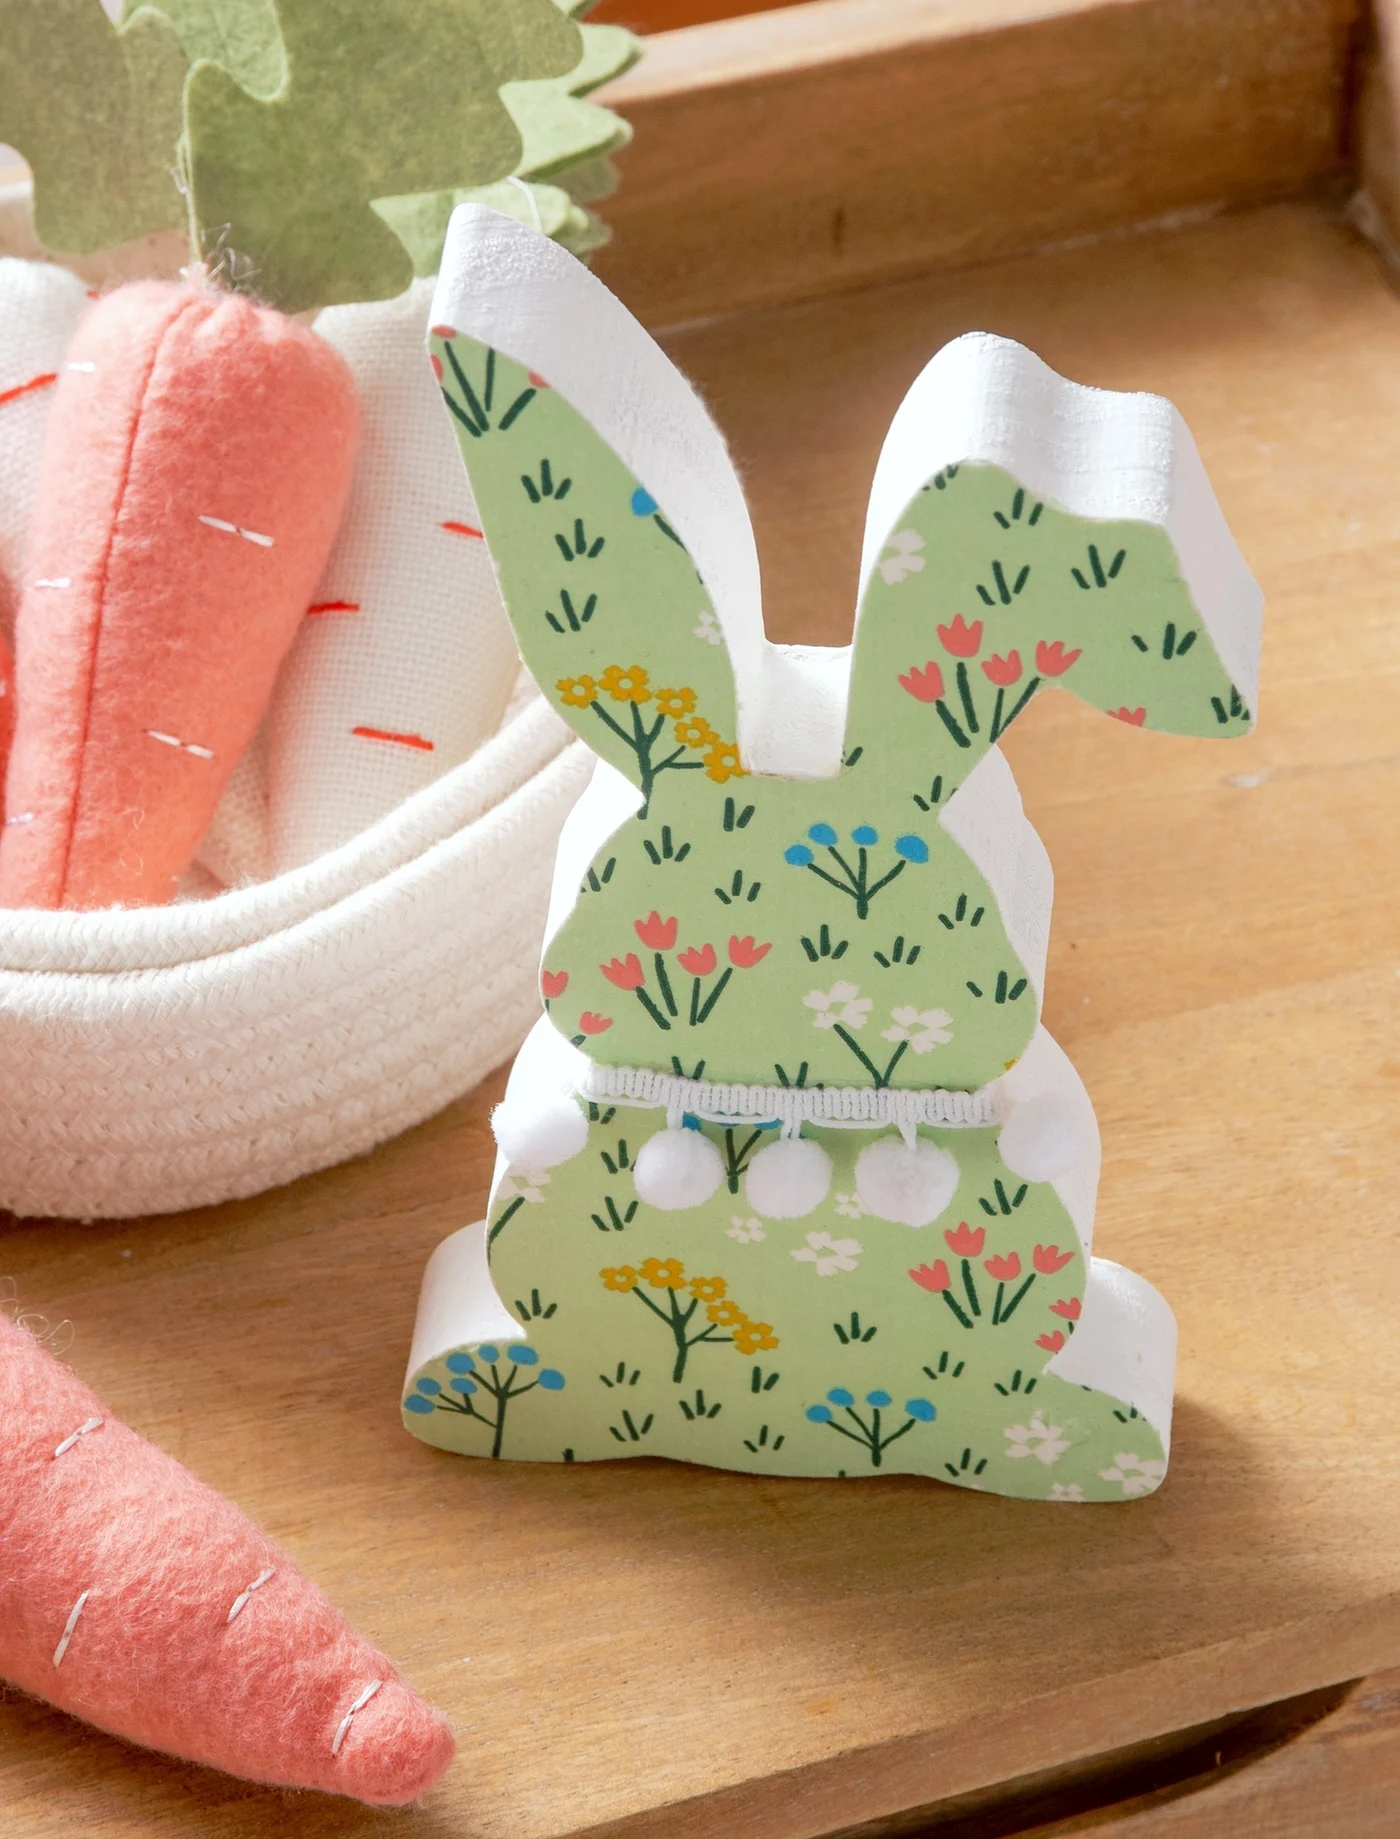 Decorating a wood bunny with napkins and Mod Podge